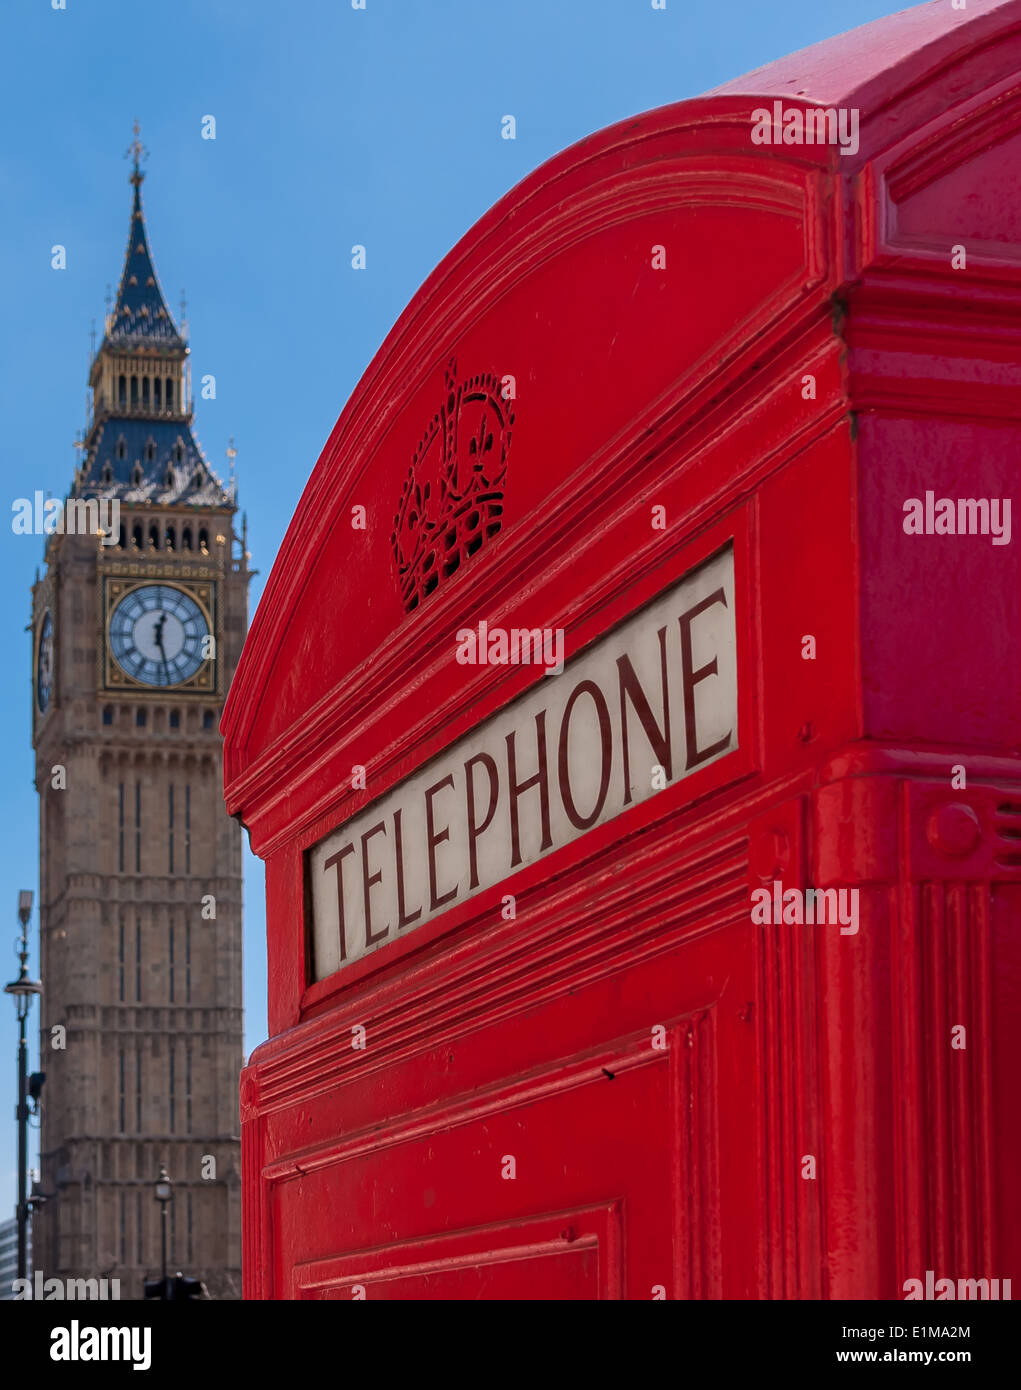 A telephone box with the Elizabeth Tower in the background. Stock Photo